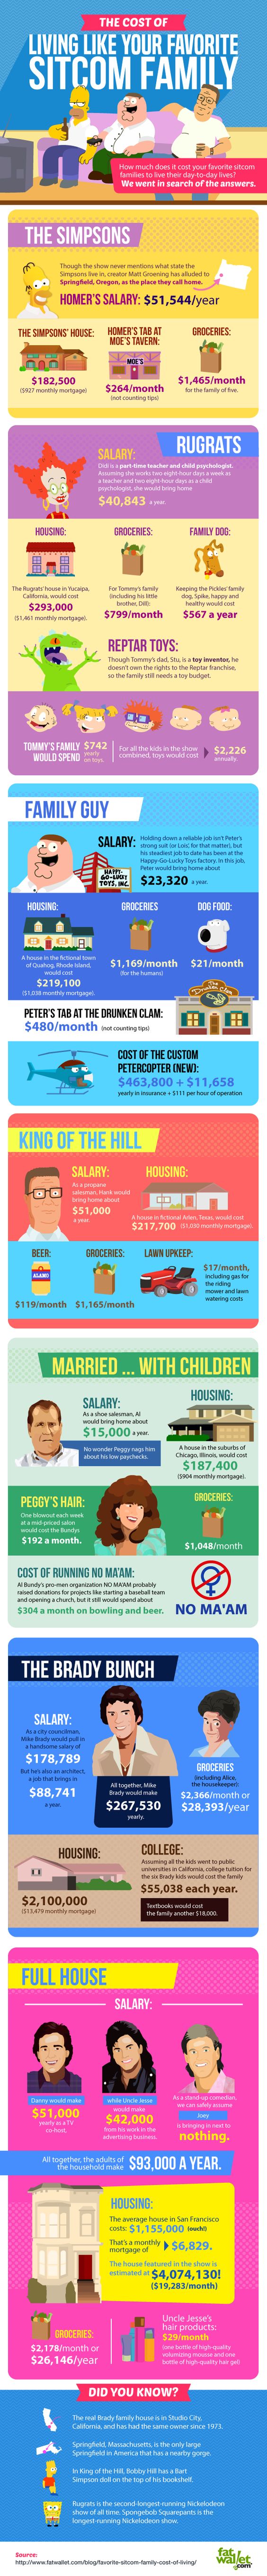 the cost of living like a sitcom family